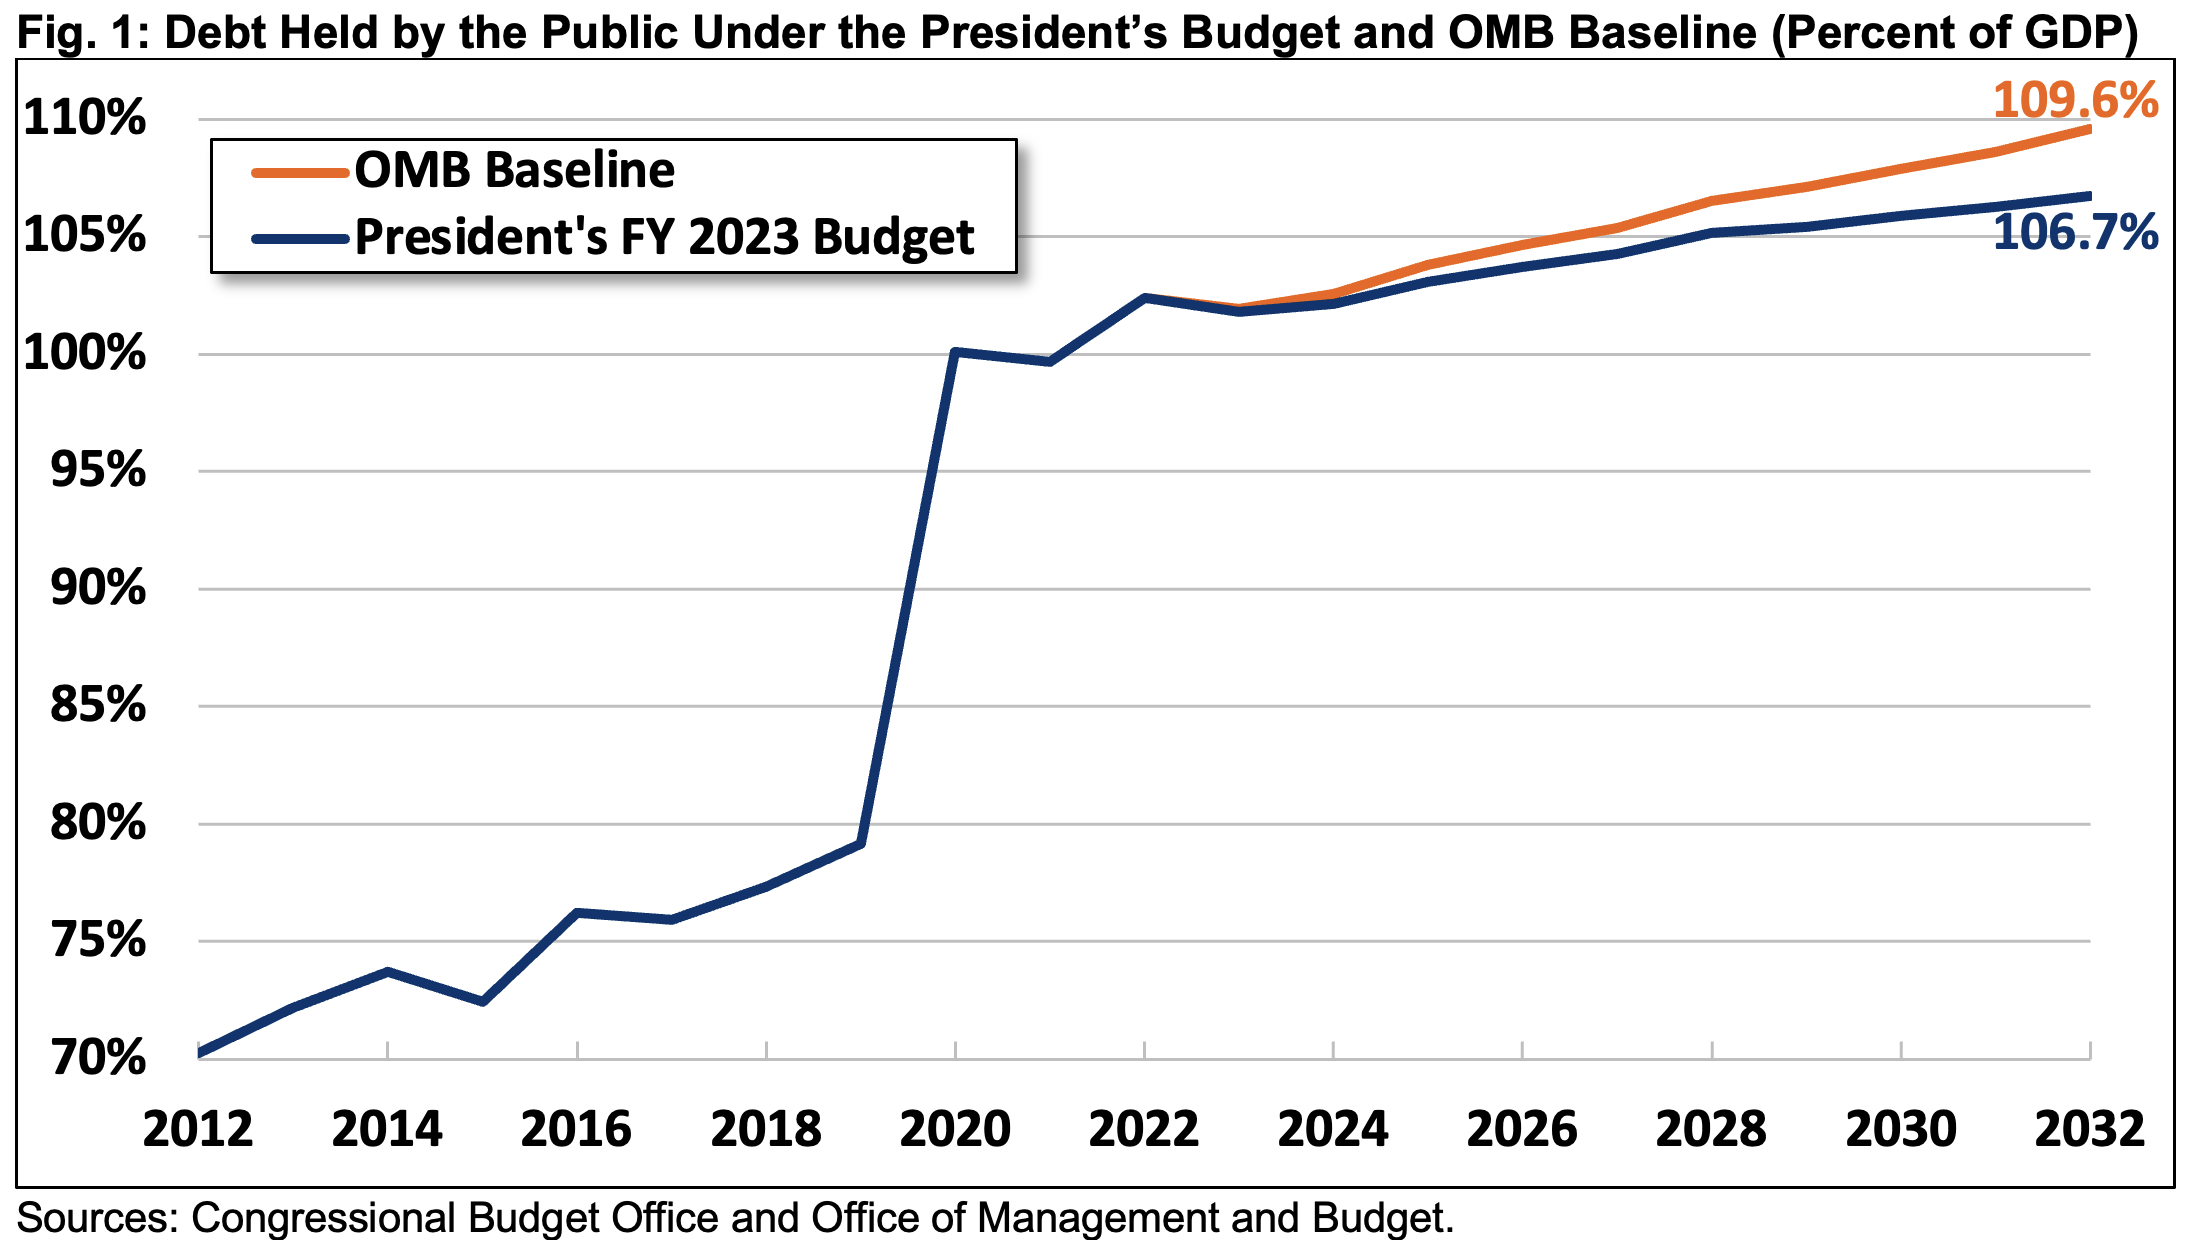 Debt Held by the Public Under the President's Budget and OMB Baseline (Percent of GDP)